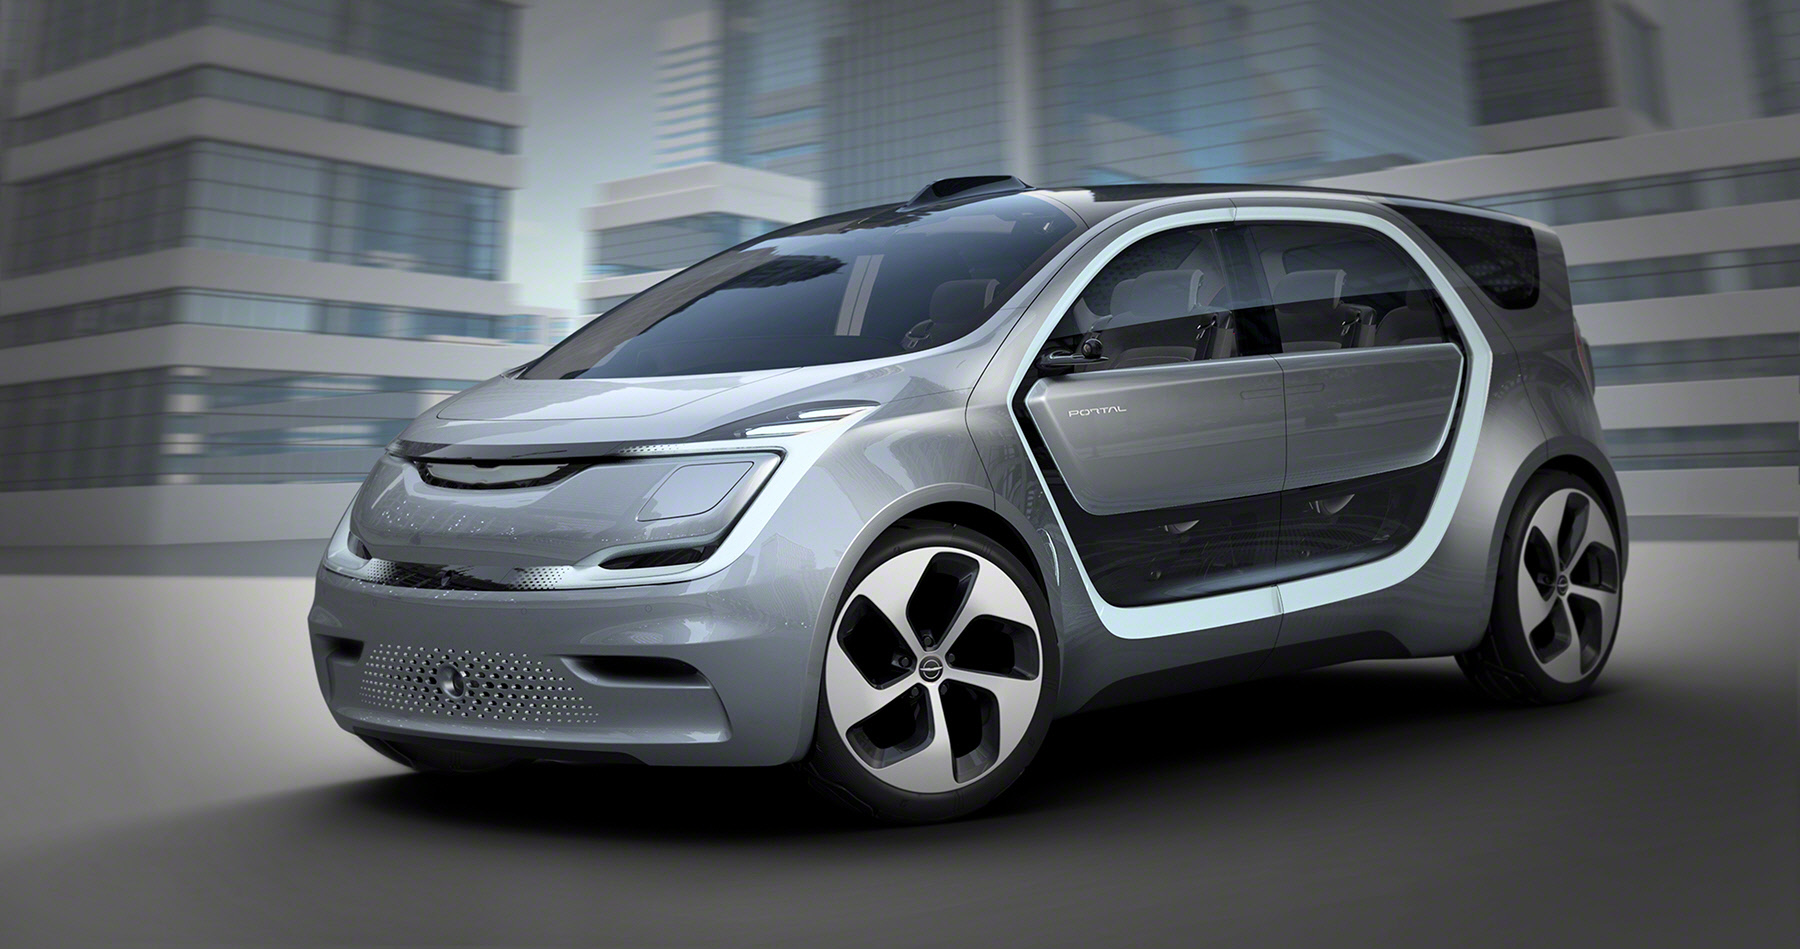 Things to know about the Chrysler Portal Concept, plus more build up to CES and Detroit Auto Show